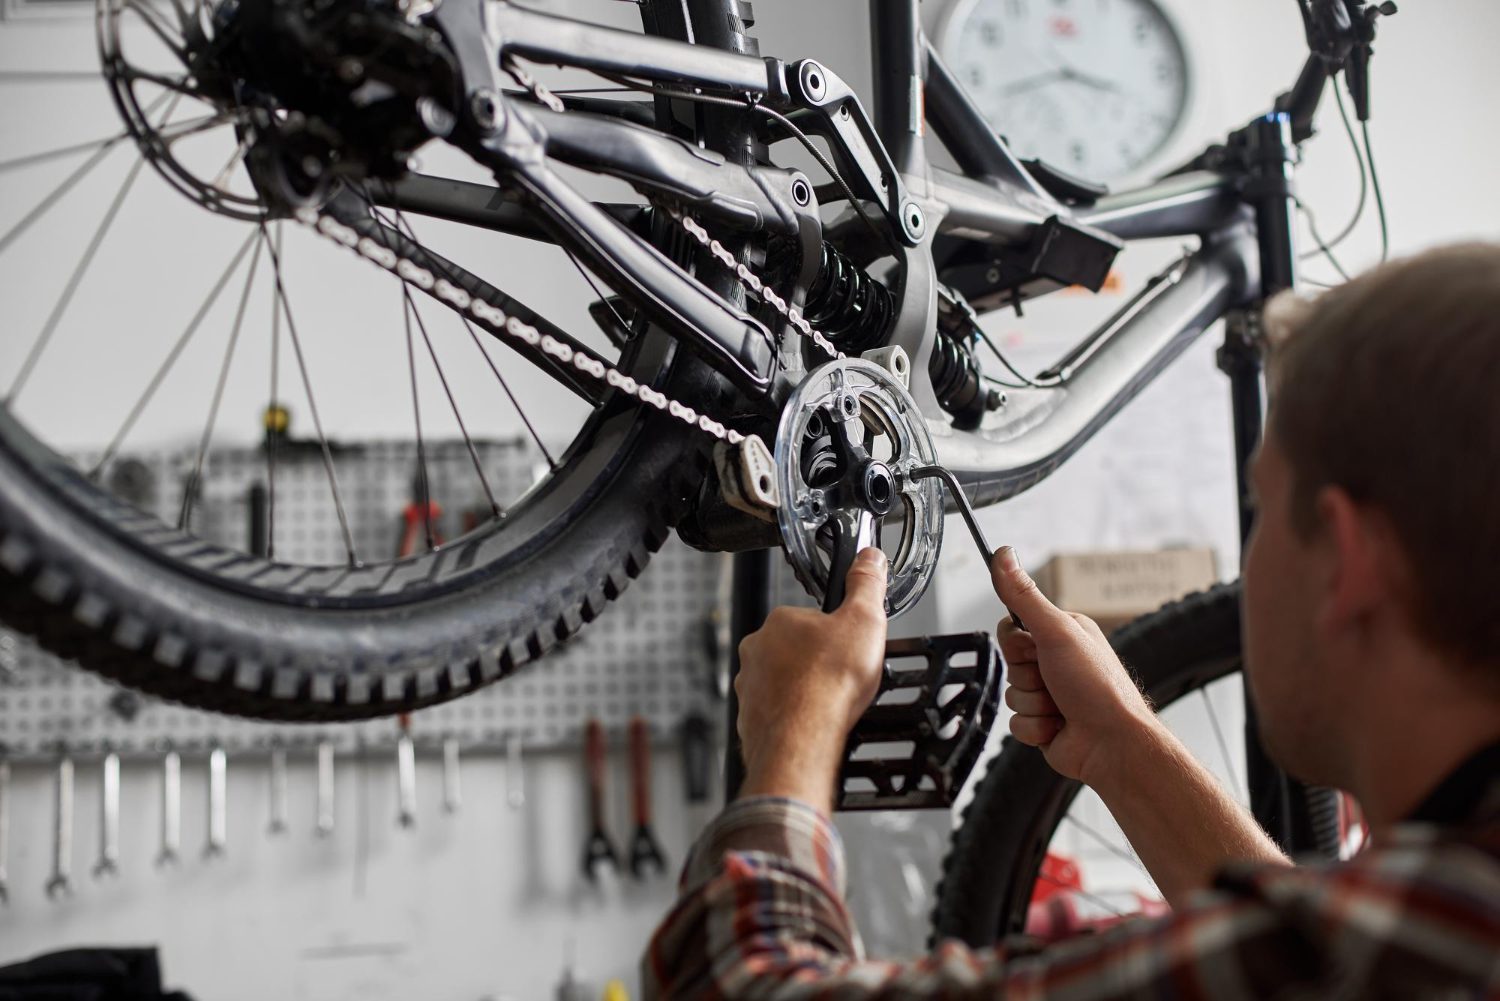 Male mechanic making service in bicycle repair shop using tools